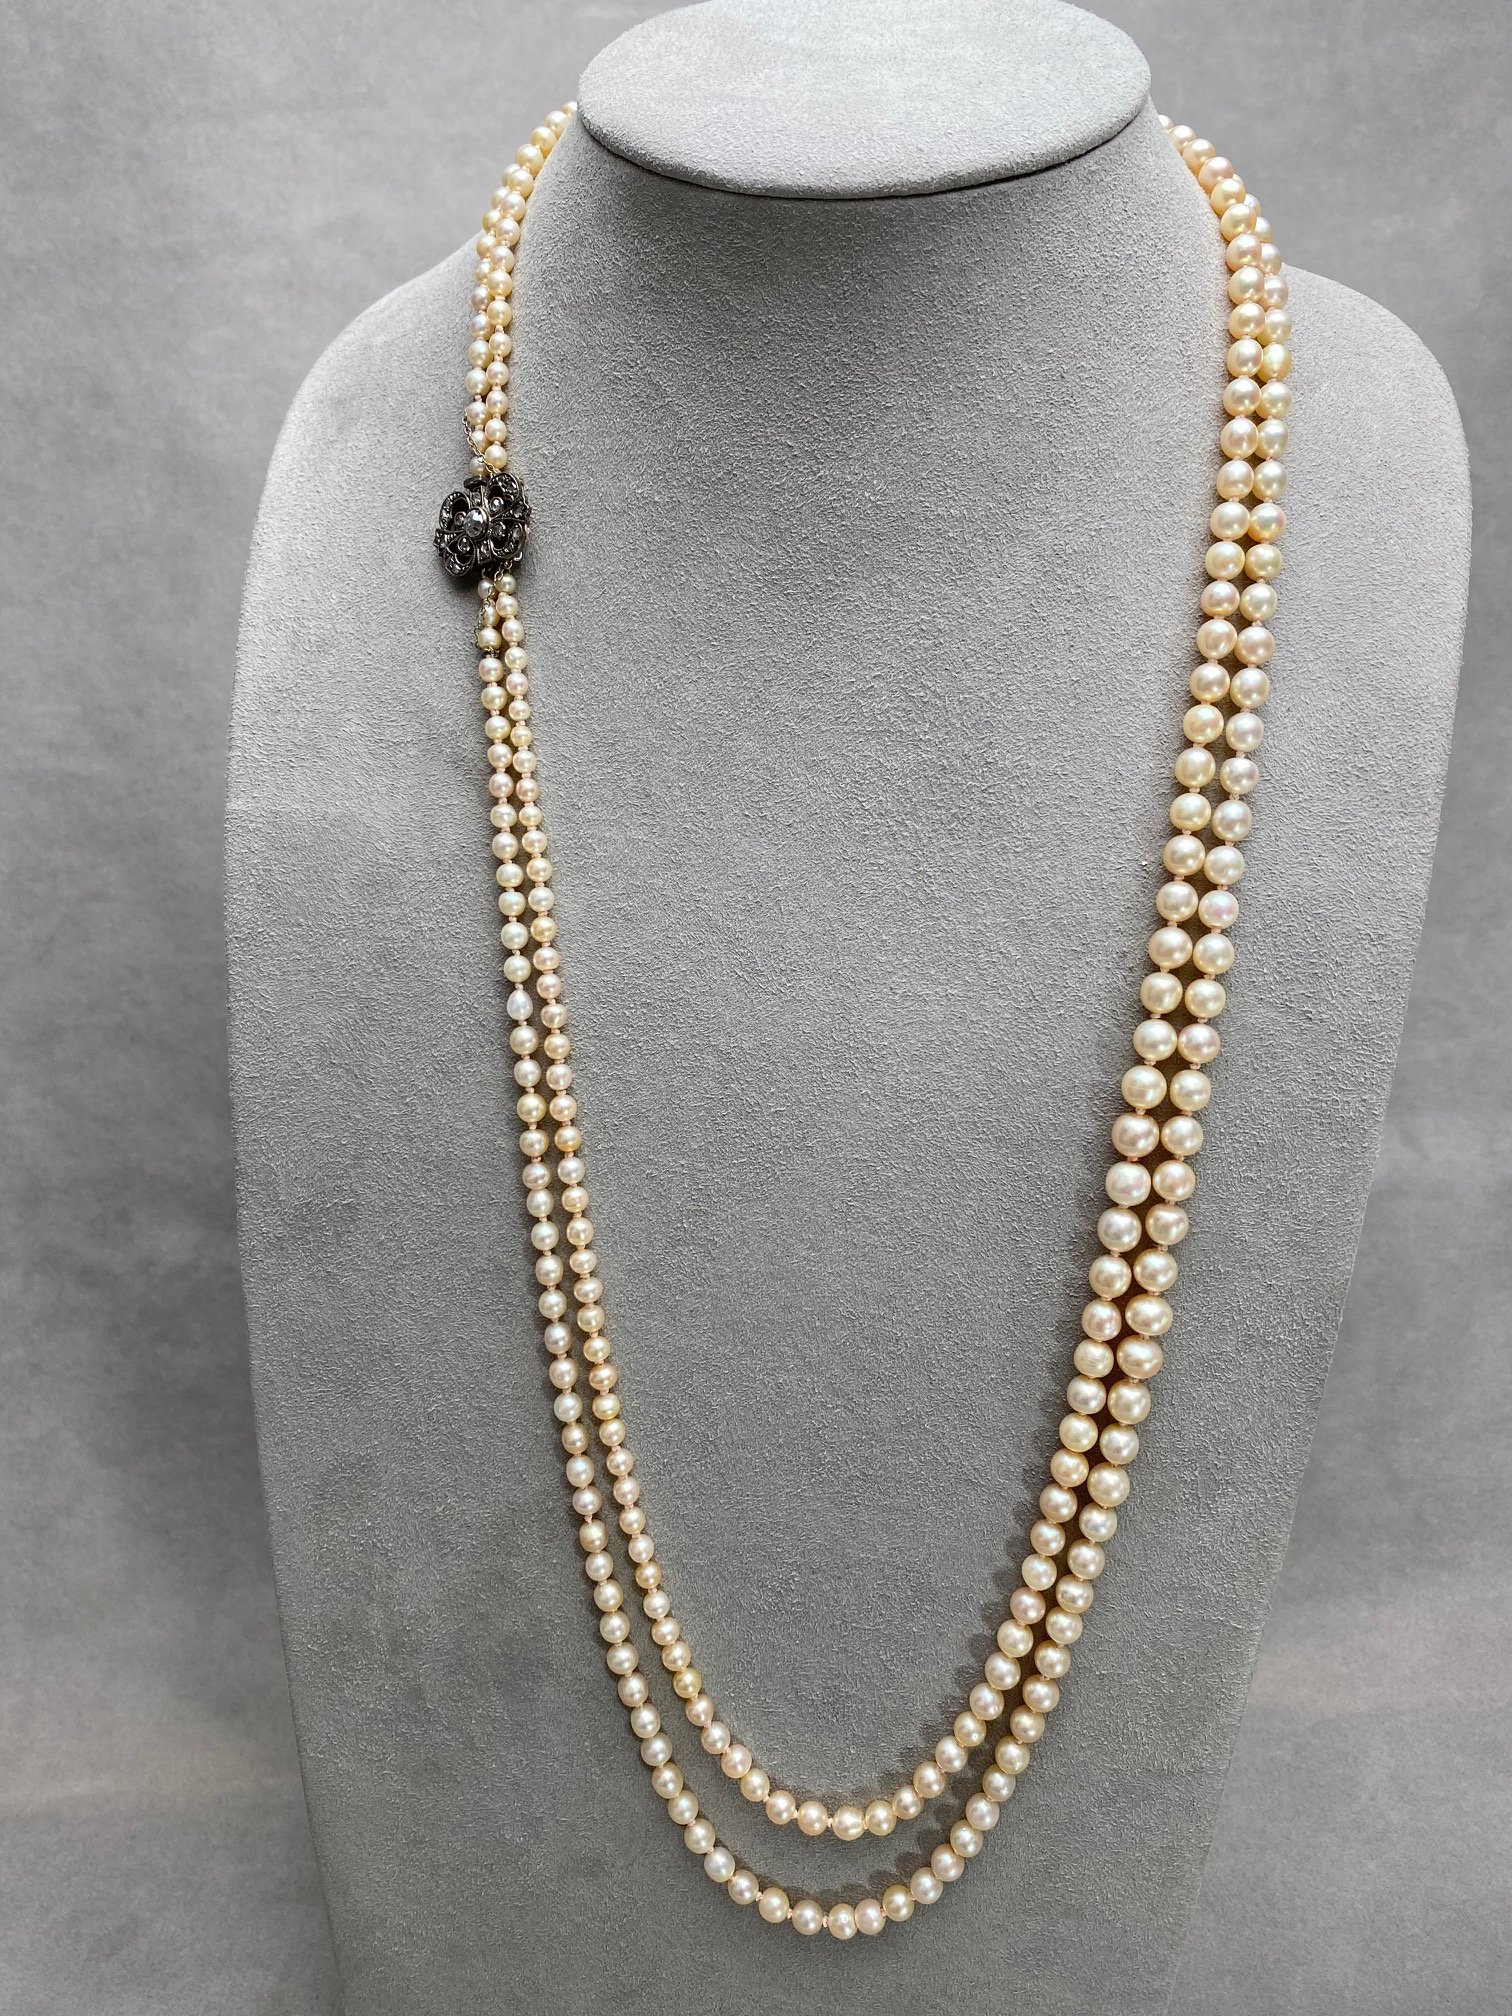 Double strand natural pearl necklace with antique clasp.jpg